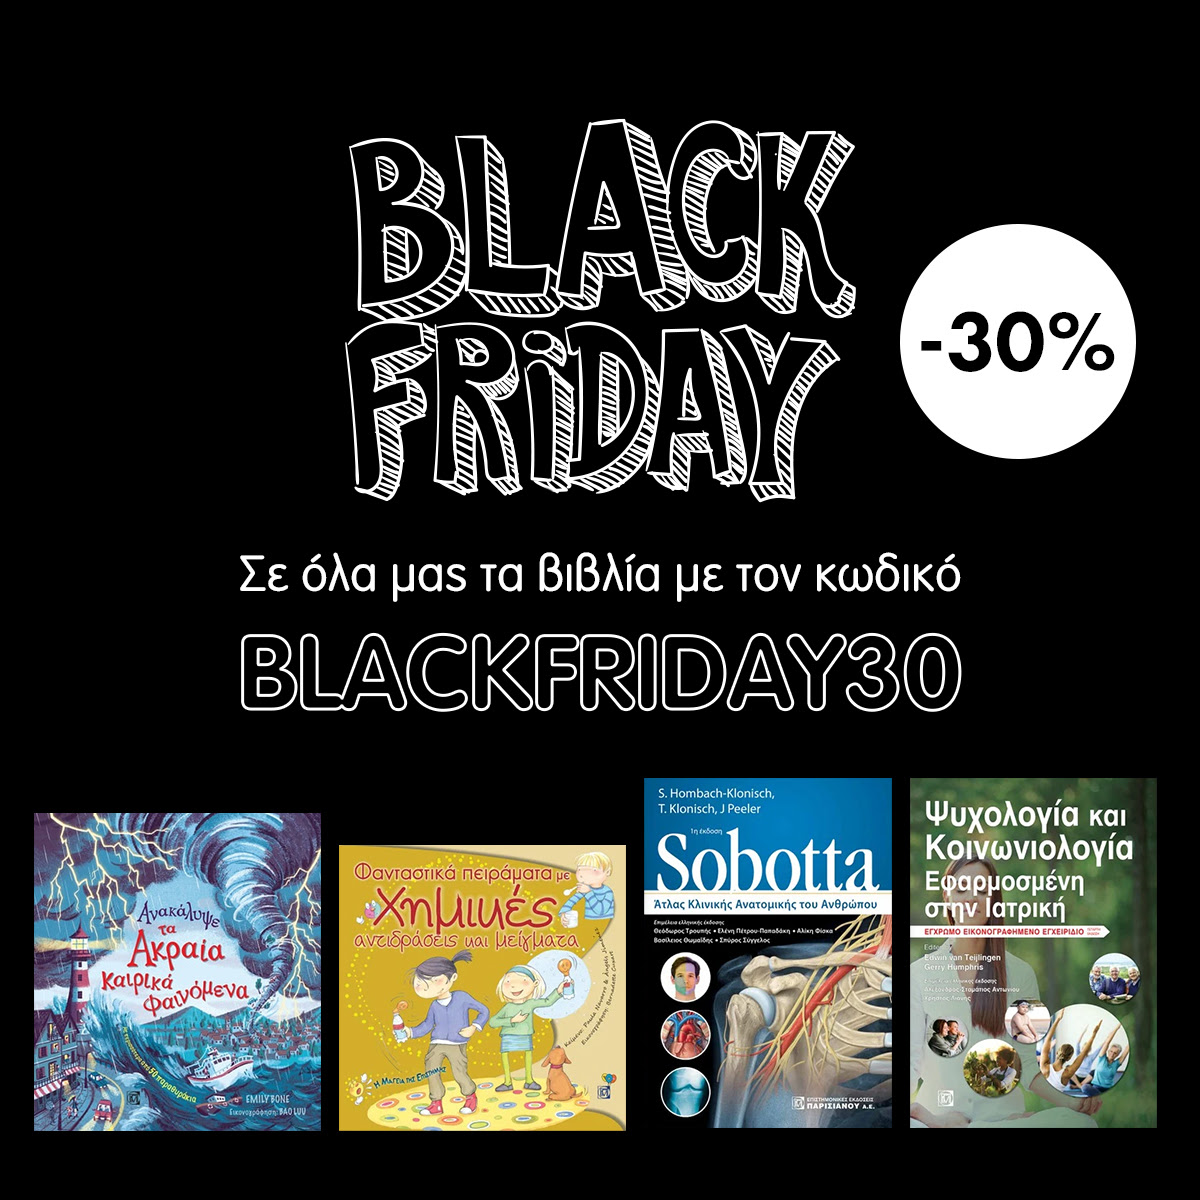 Black Friday offers -30%